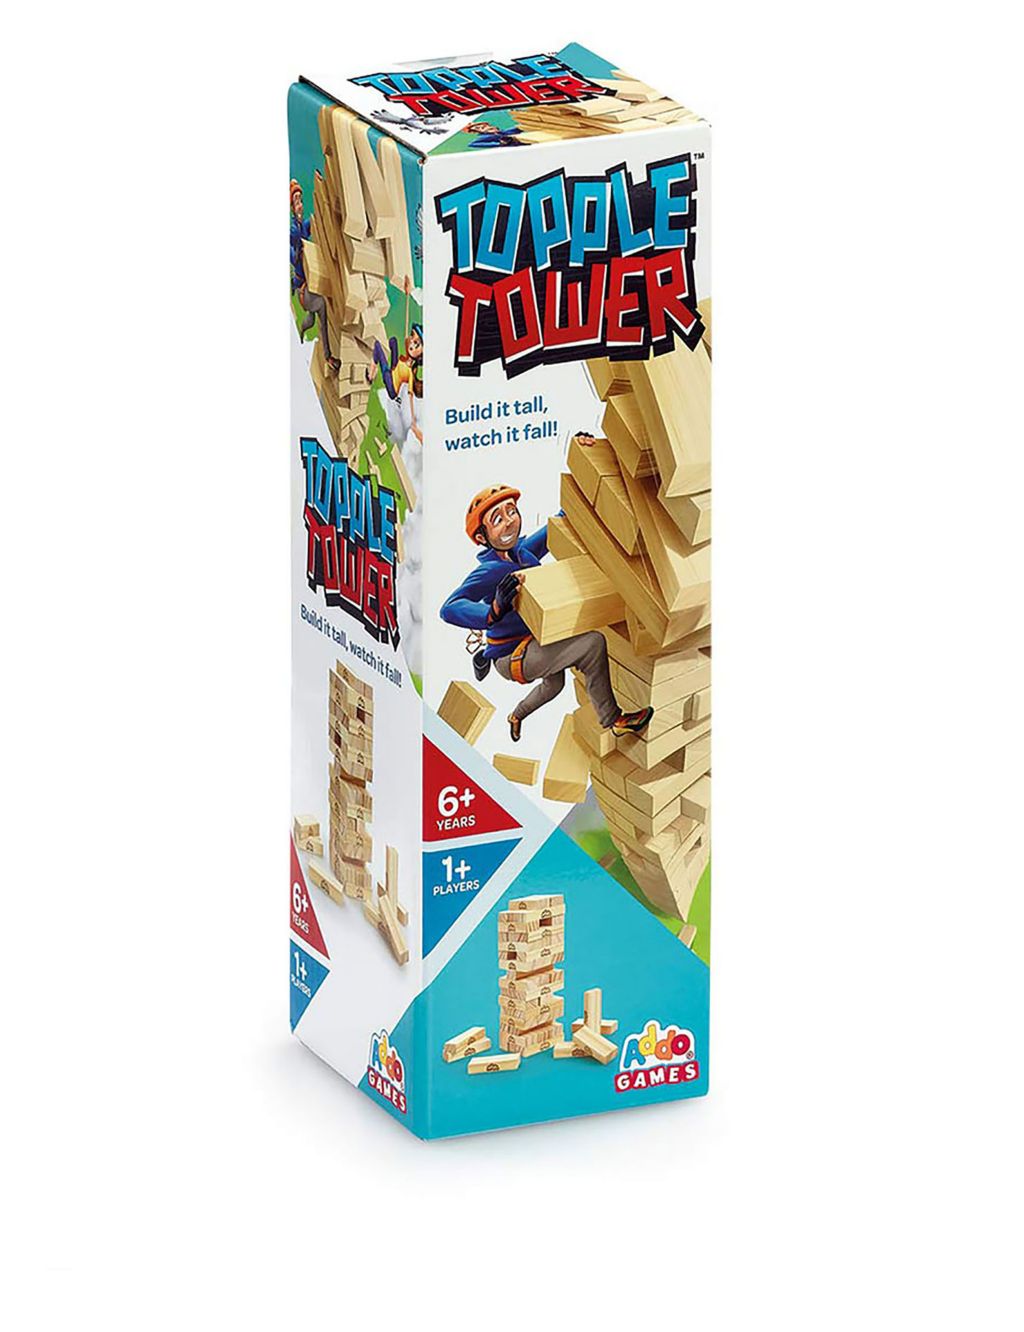 Topple Tower (6+ Yrs)